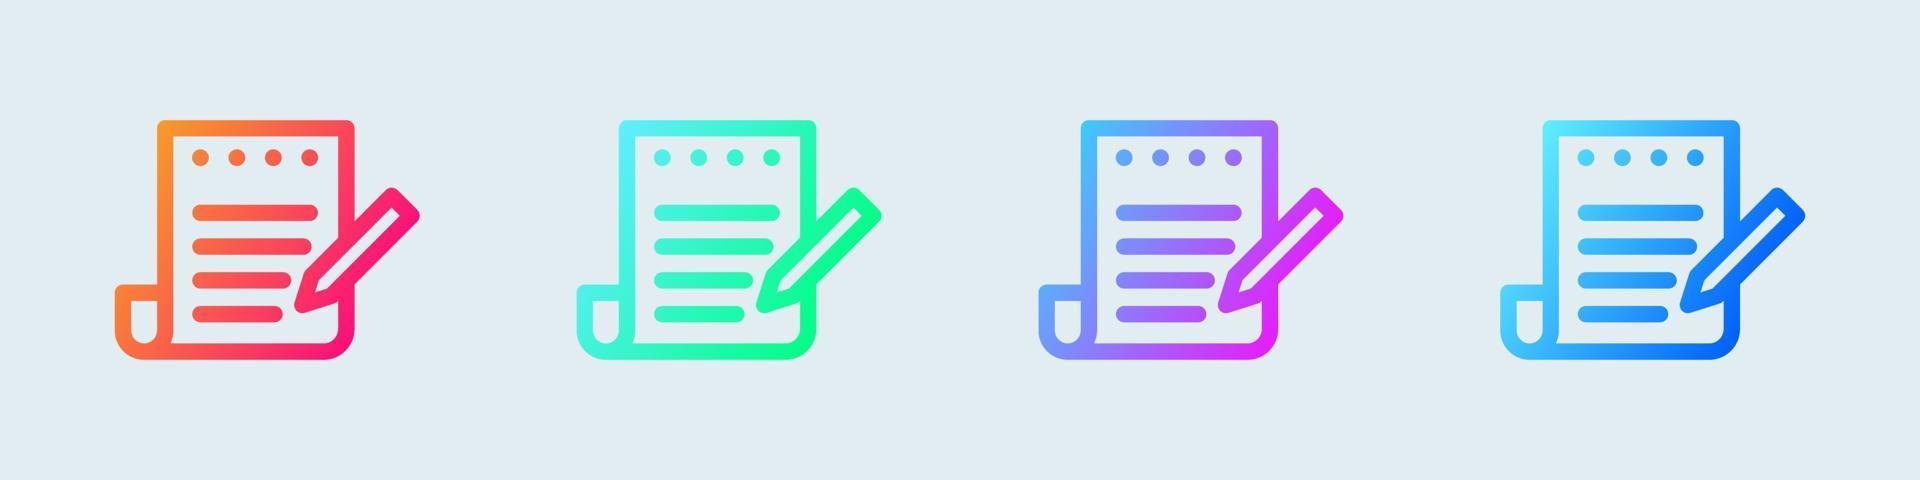 Draft line icon in gradient colors. Paper signs vector illustration.